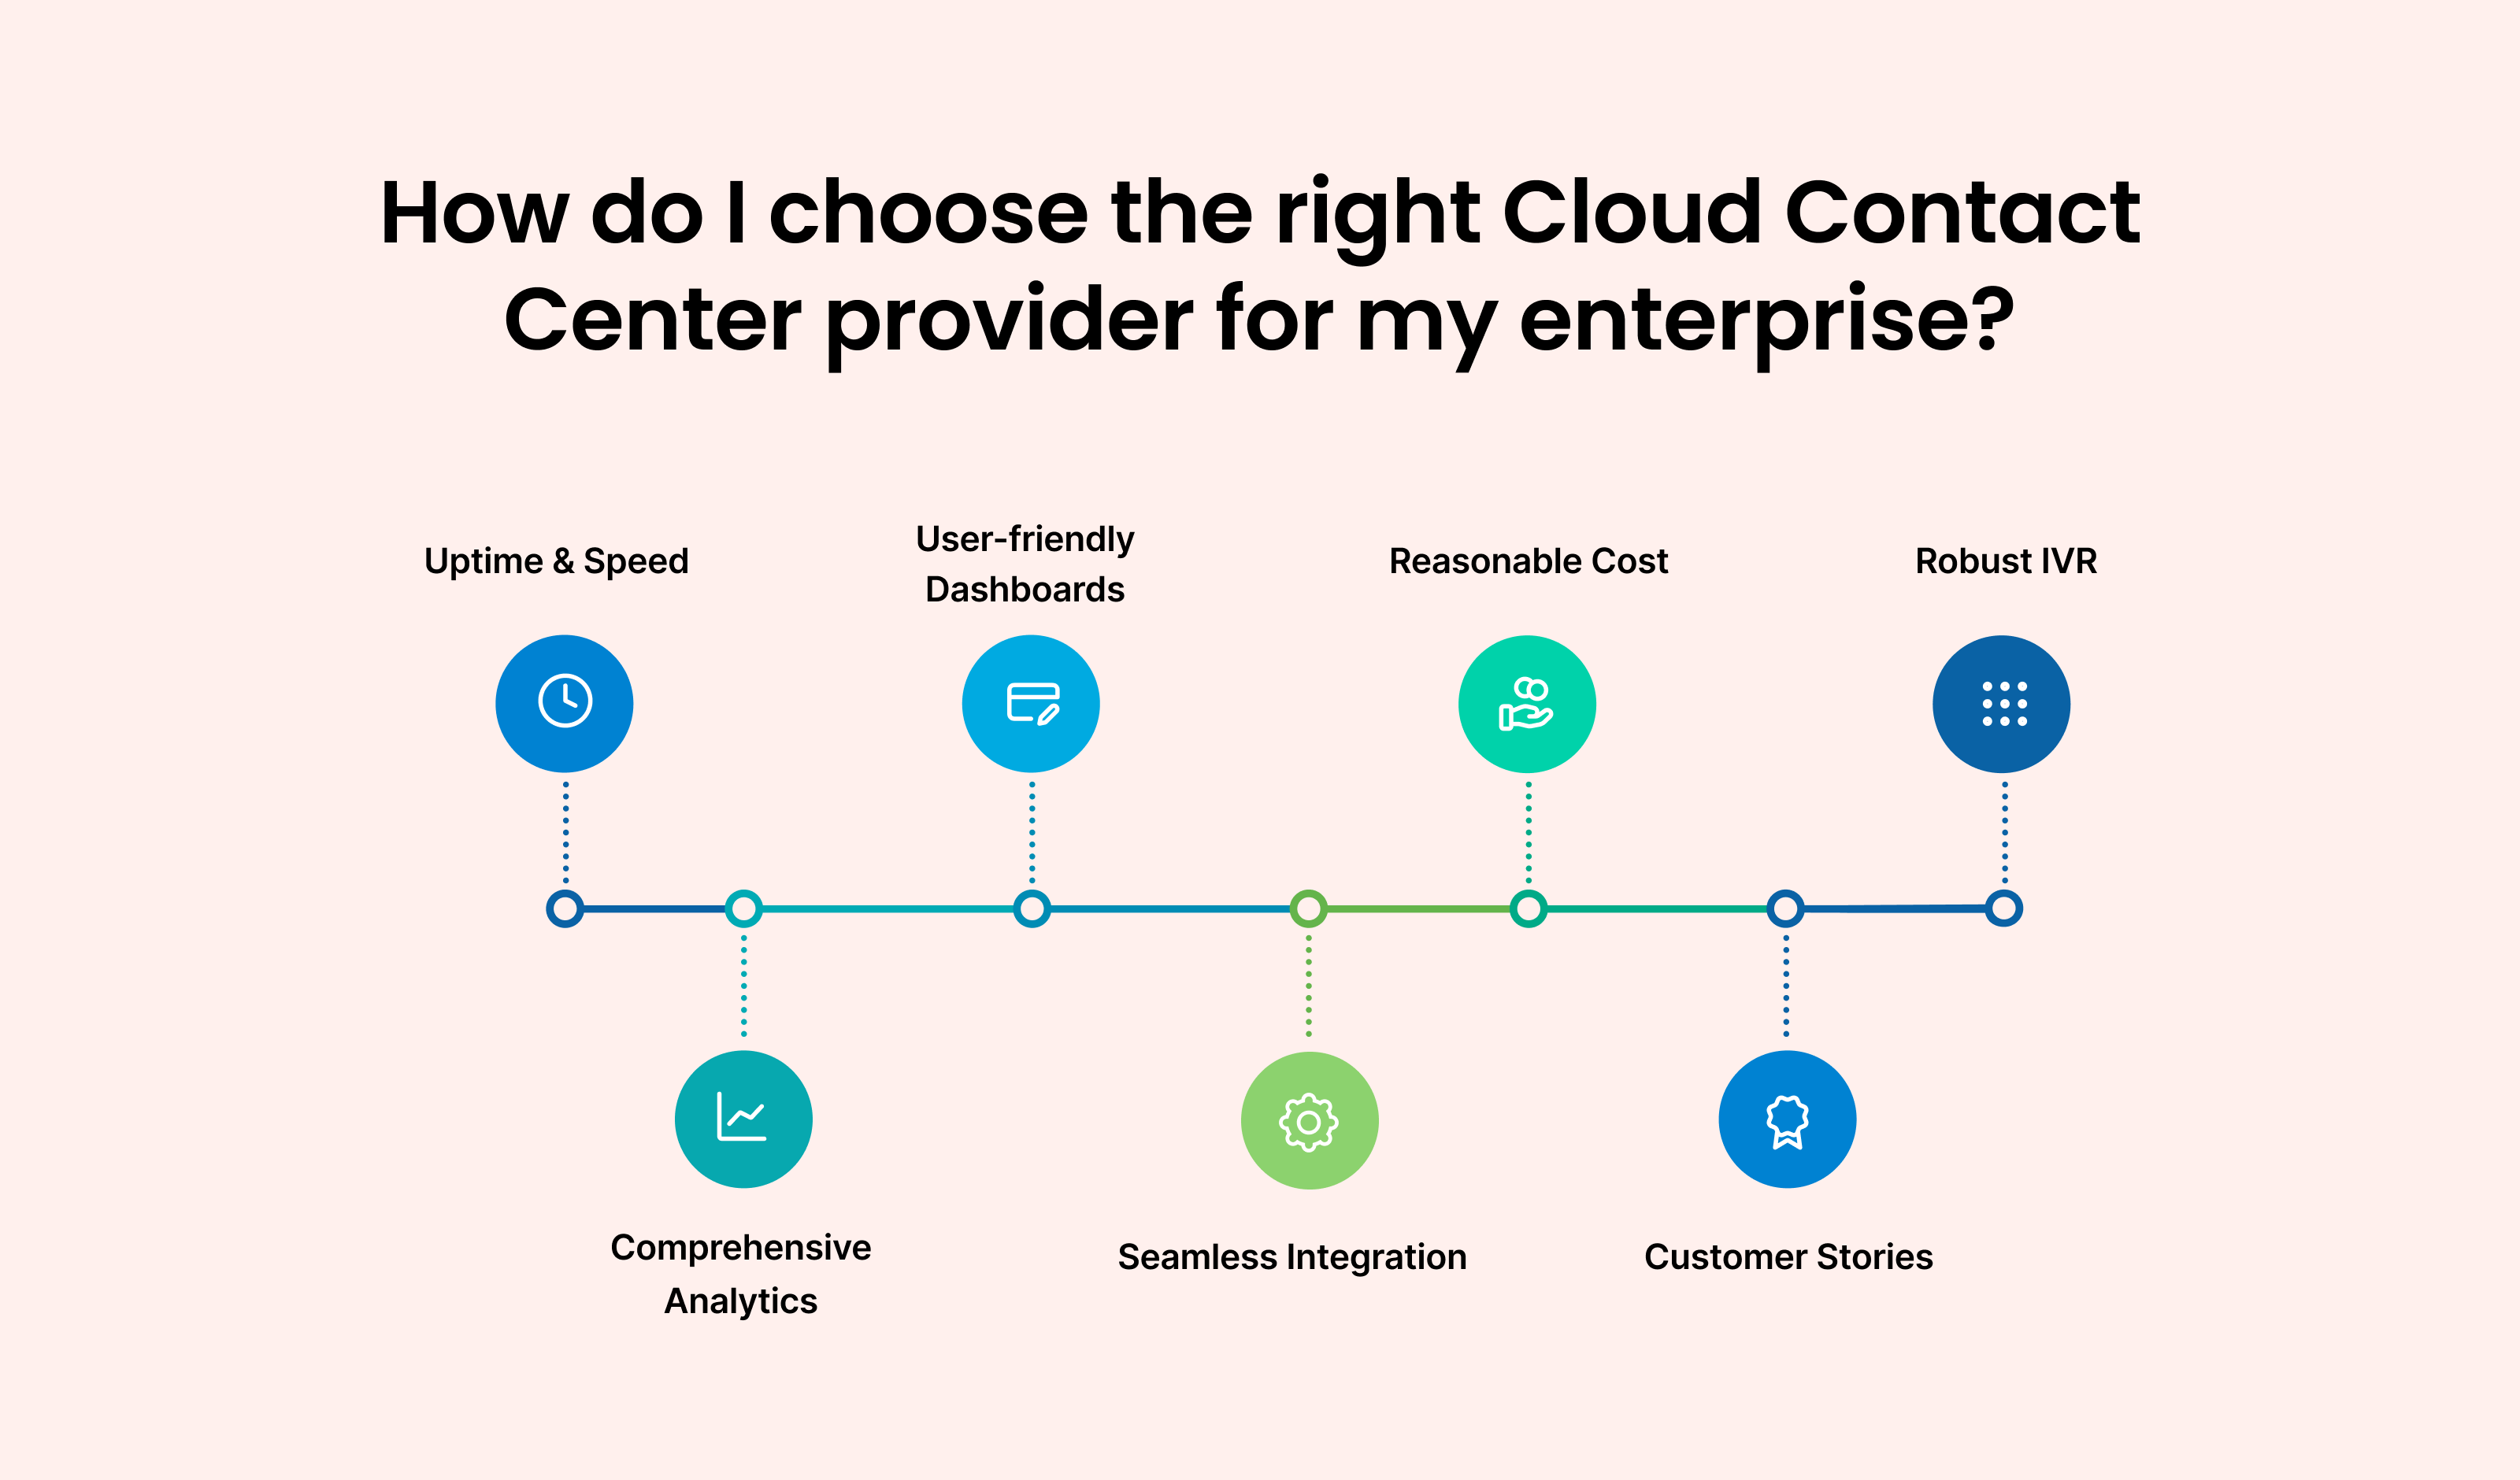 How do I choose the right Cloud Contact Center provider for my enterprise?